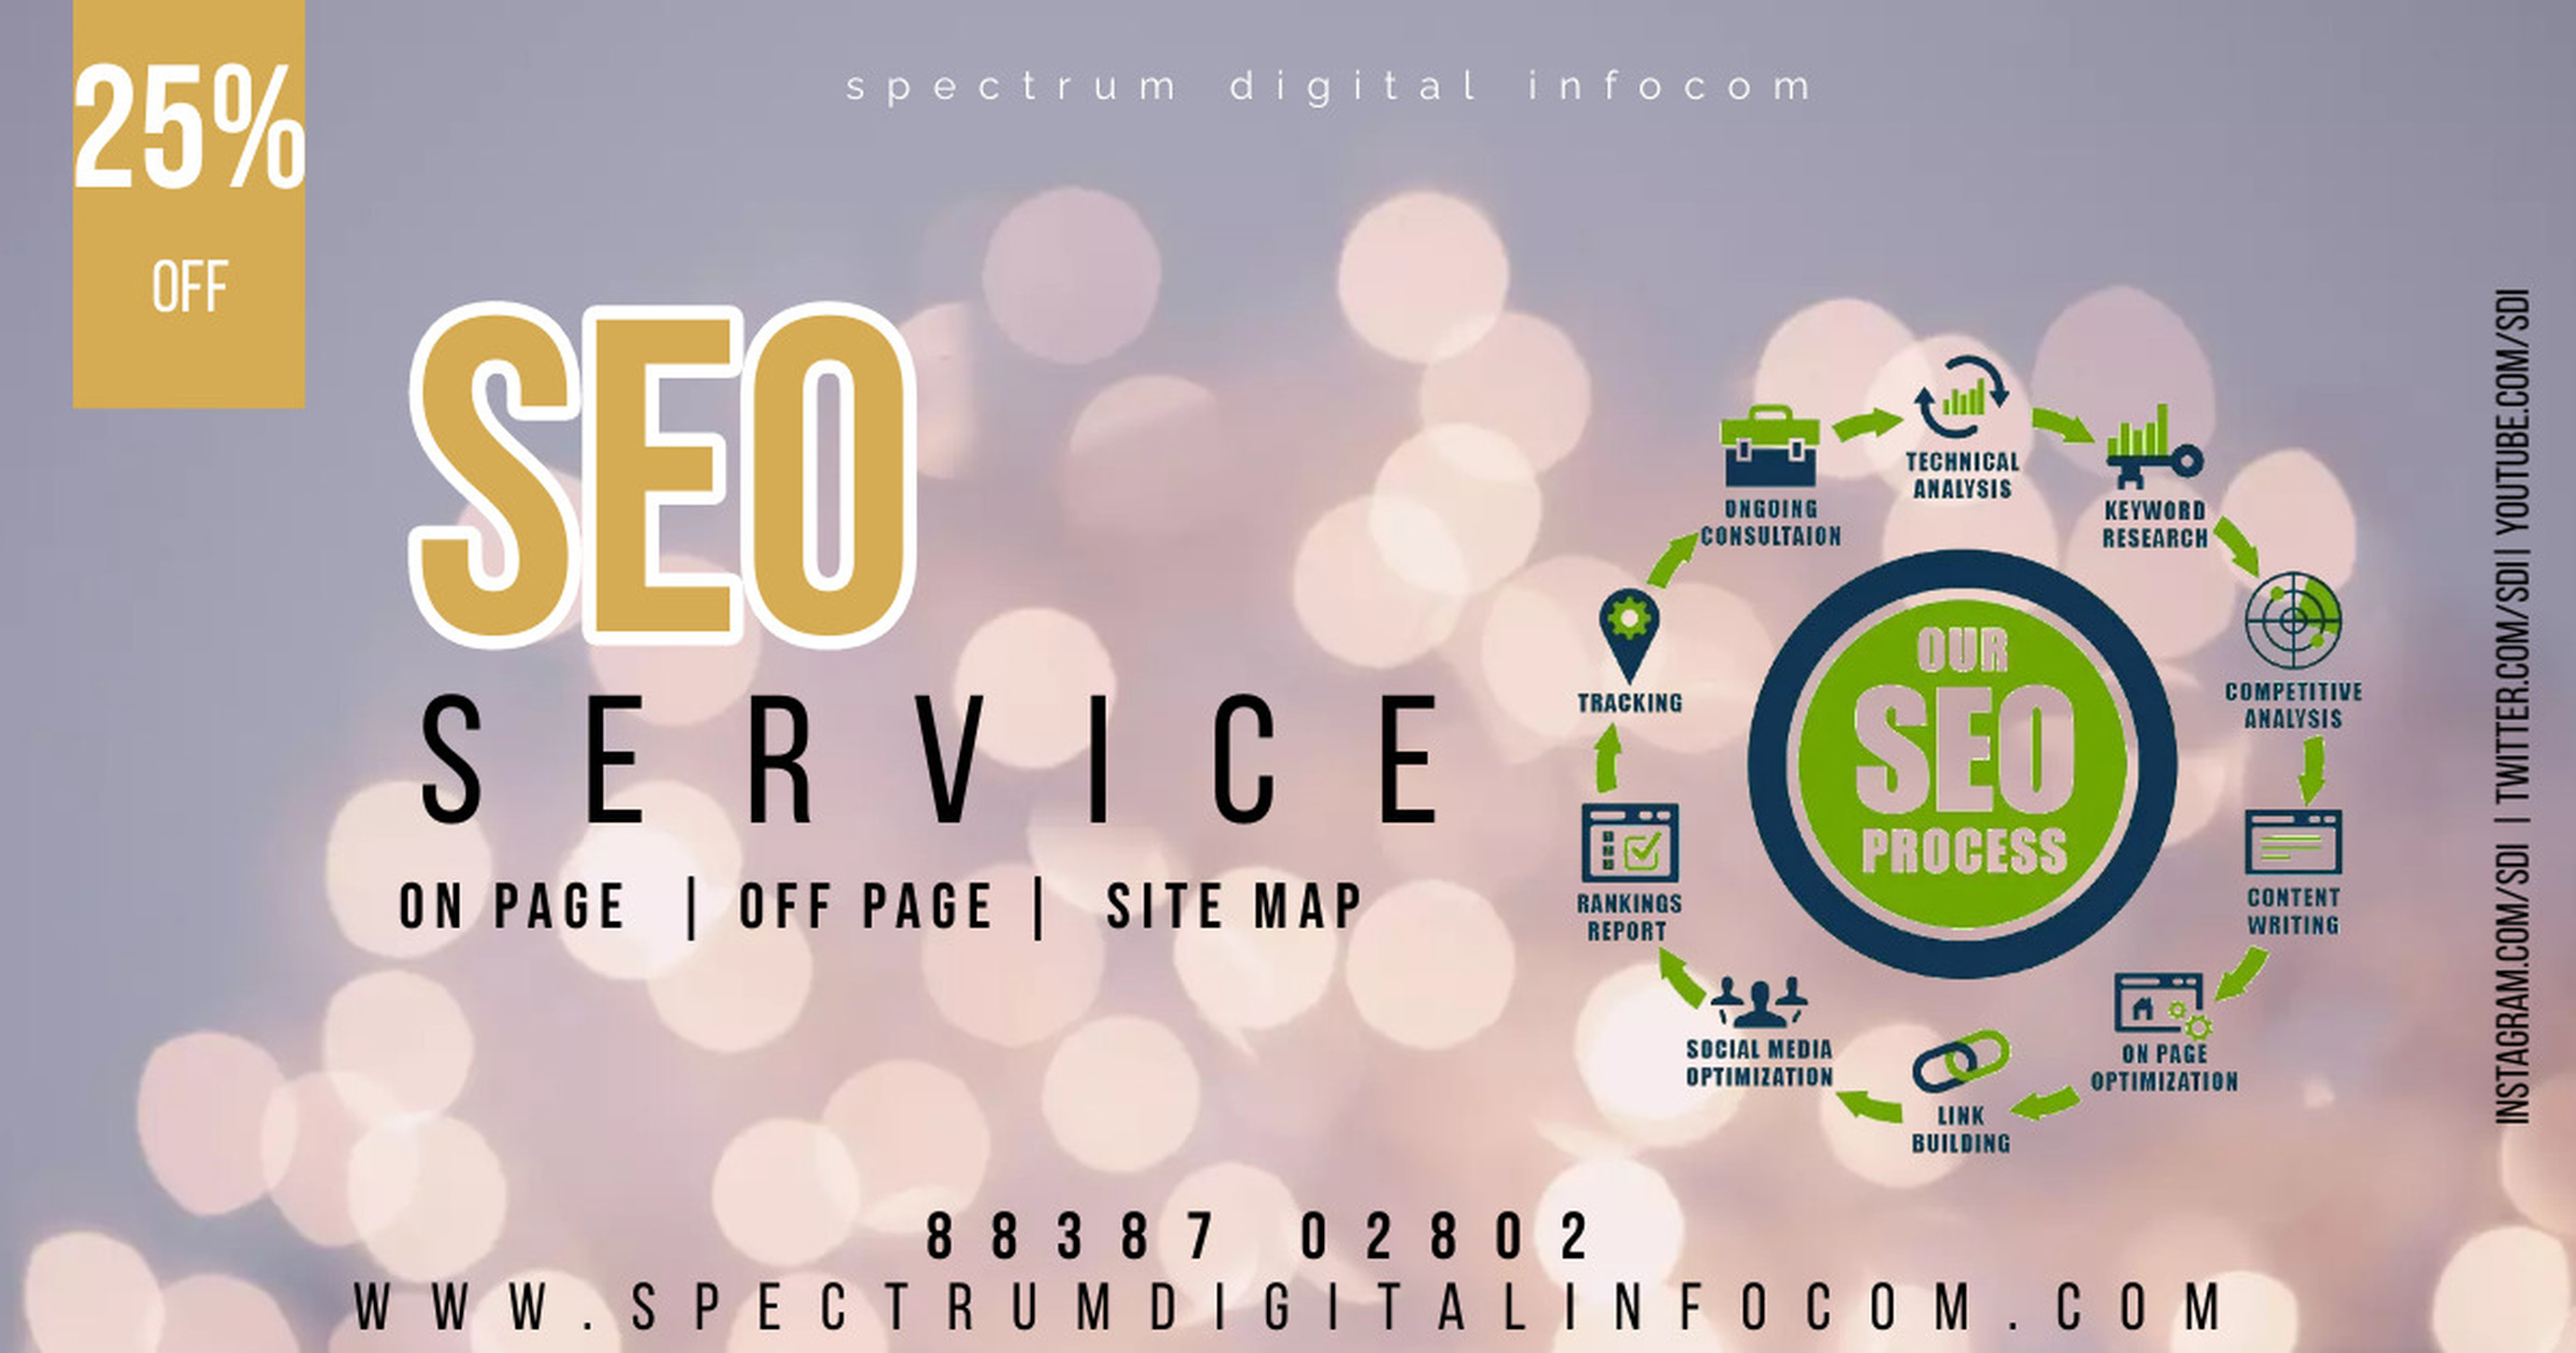 SEO services in coimbatore2825452, Online Event